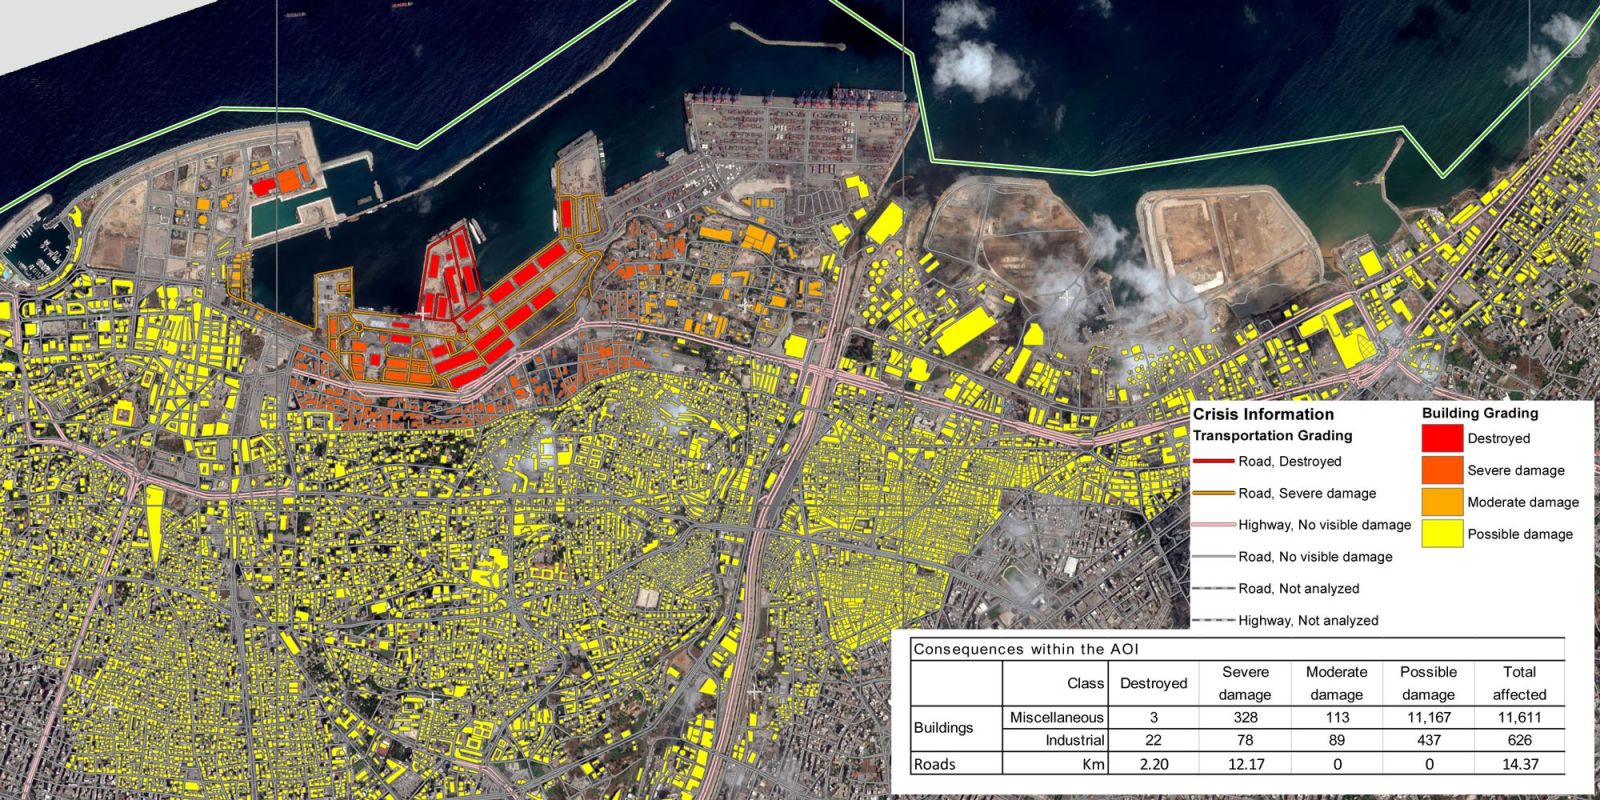 Damage assessment after the explosion 2020 in Beirut